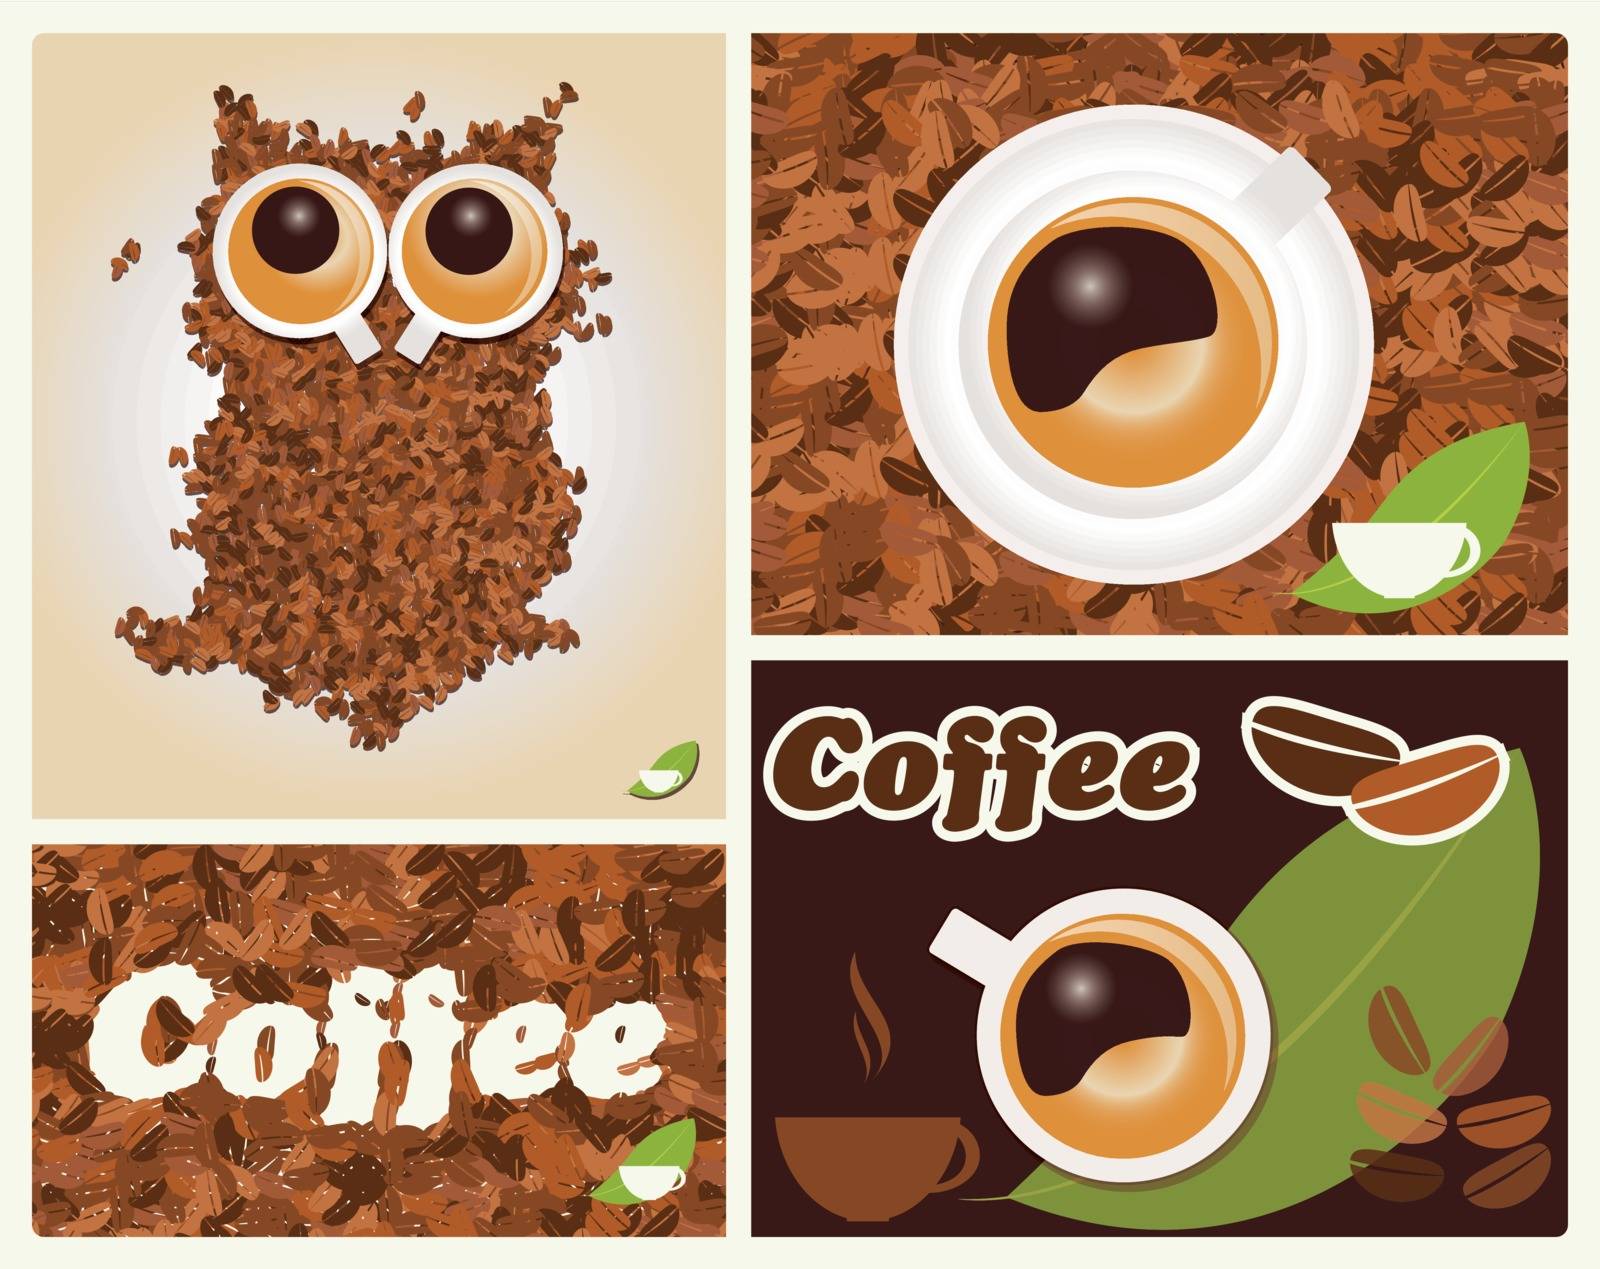 coffee inspired illustrations, with owl, coffee beans  by Bluelela